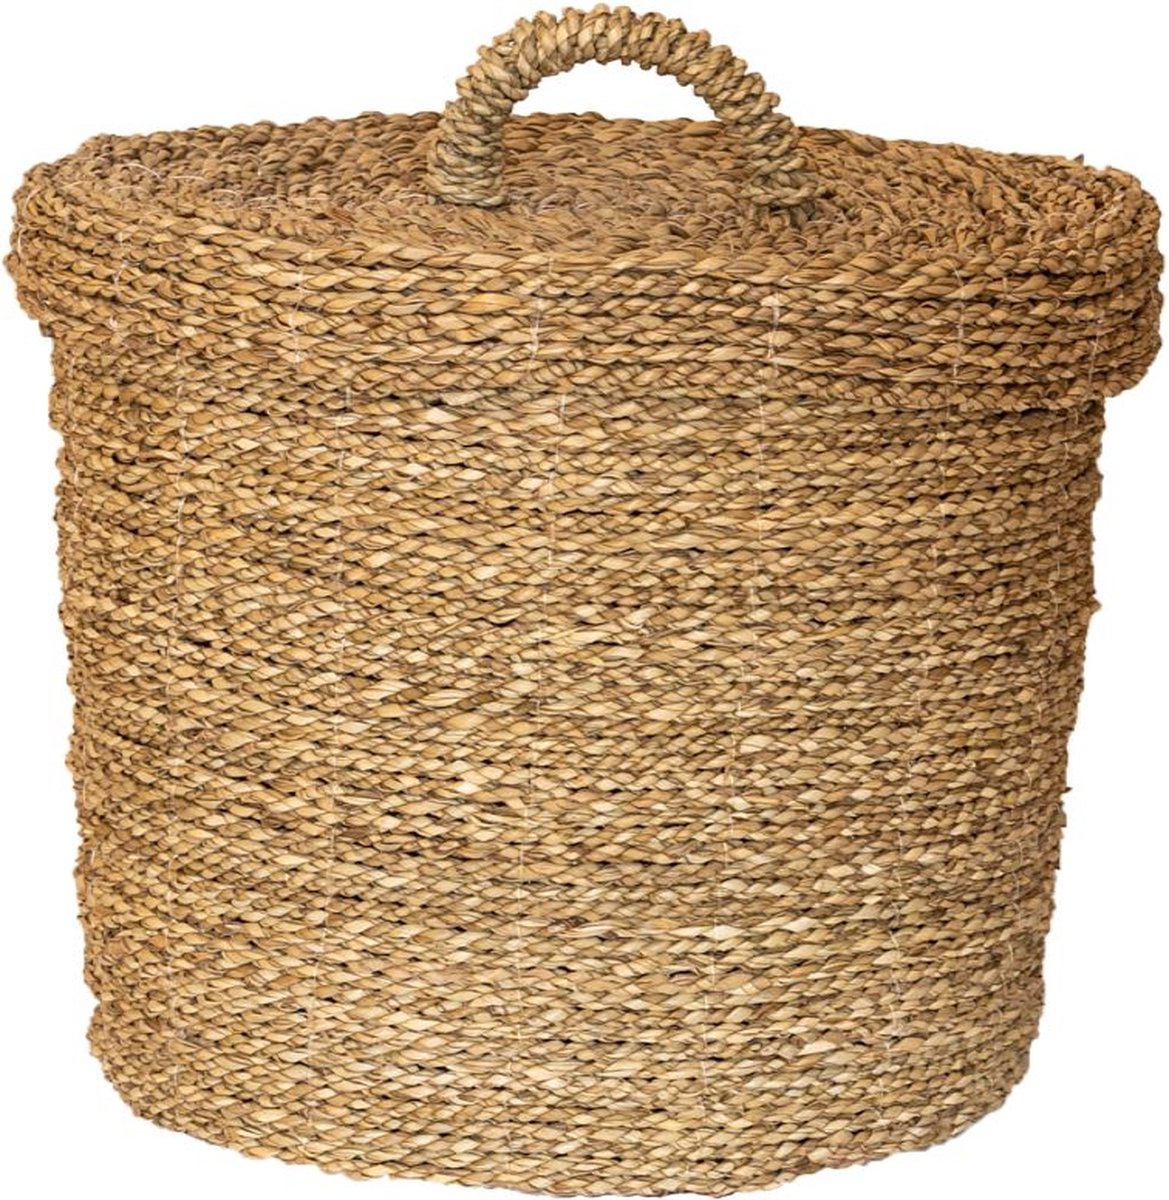 Basket with lid small size